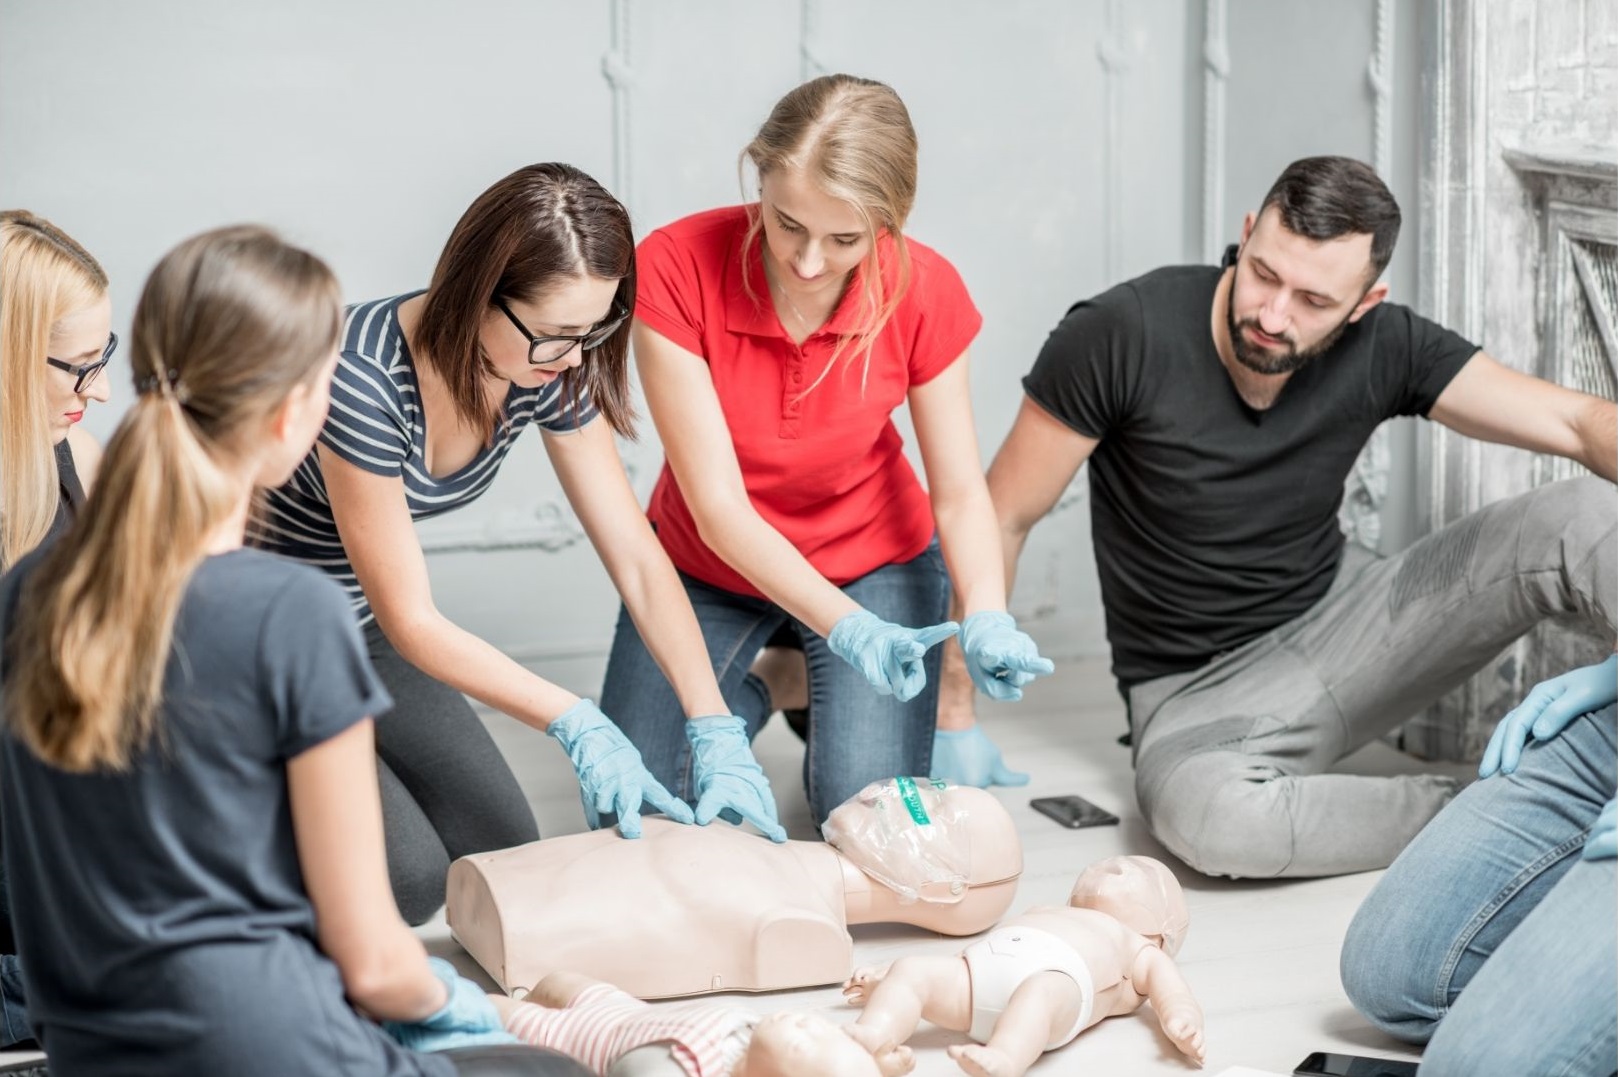 https://thefirstaidcoursesydney.com.au/wp-content/uploads/2021/10/First-Aid-for-Schools.jpg